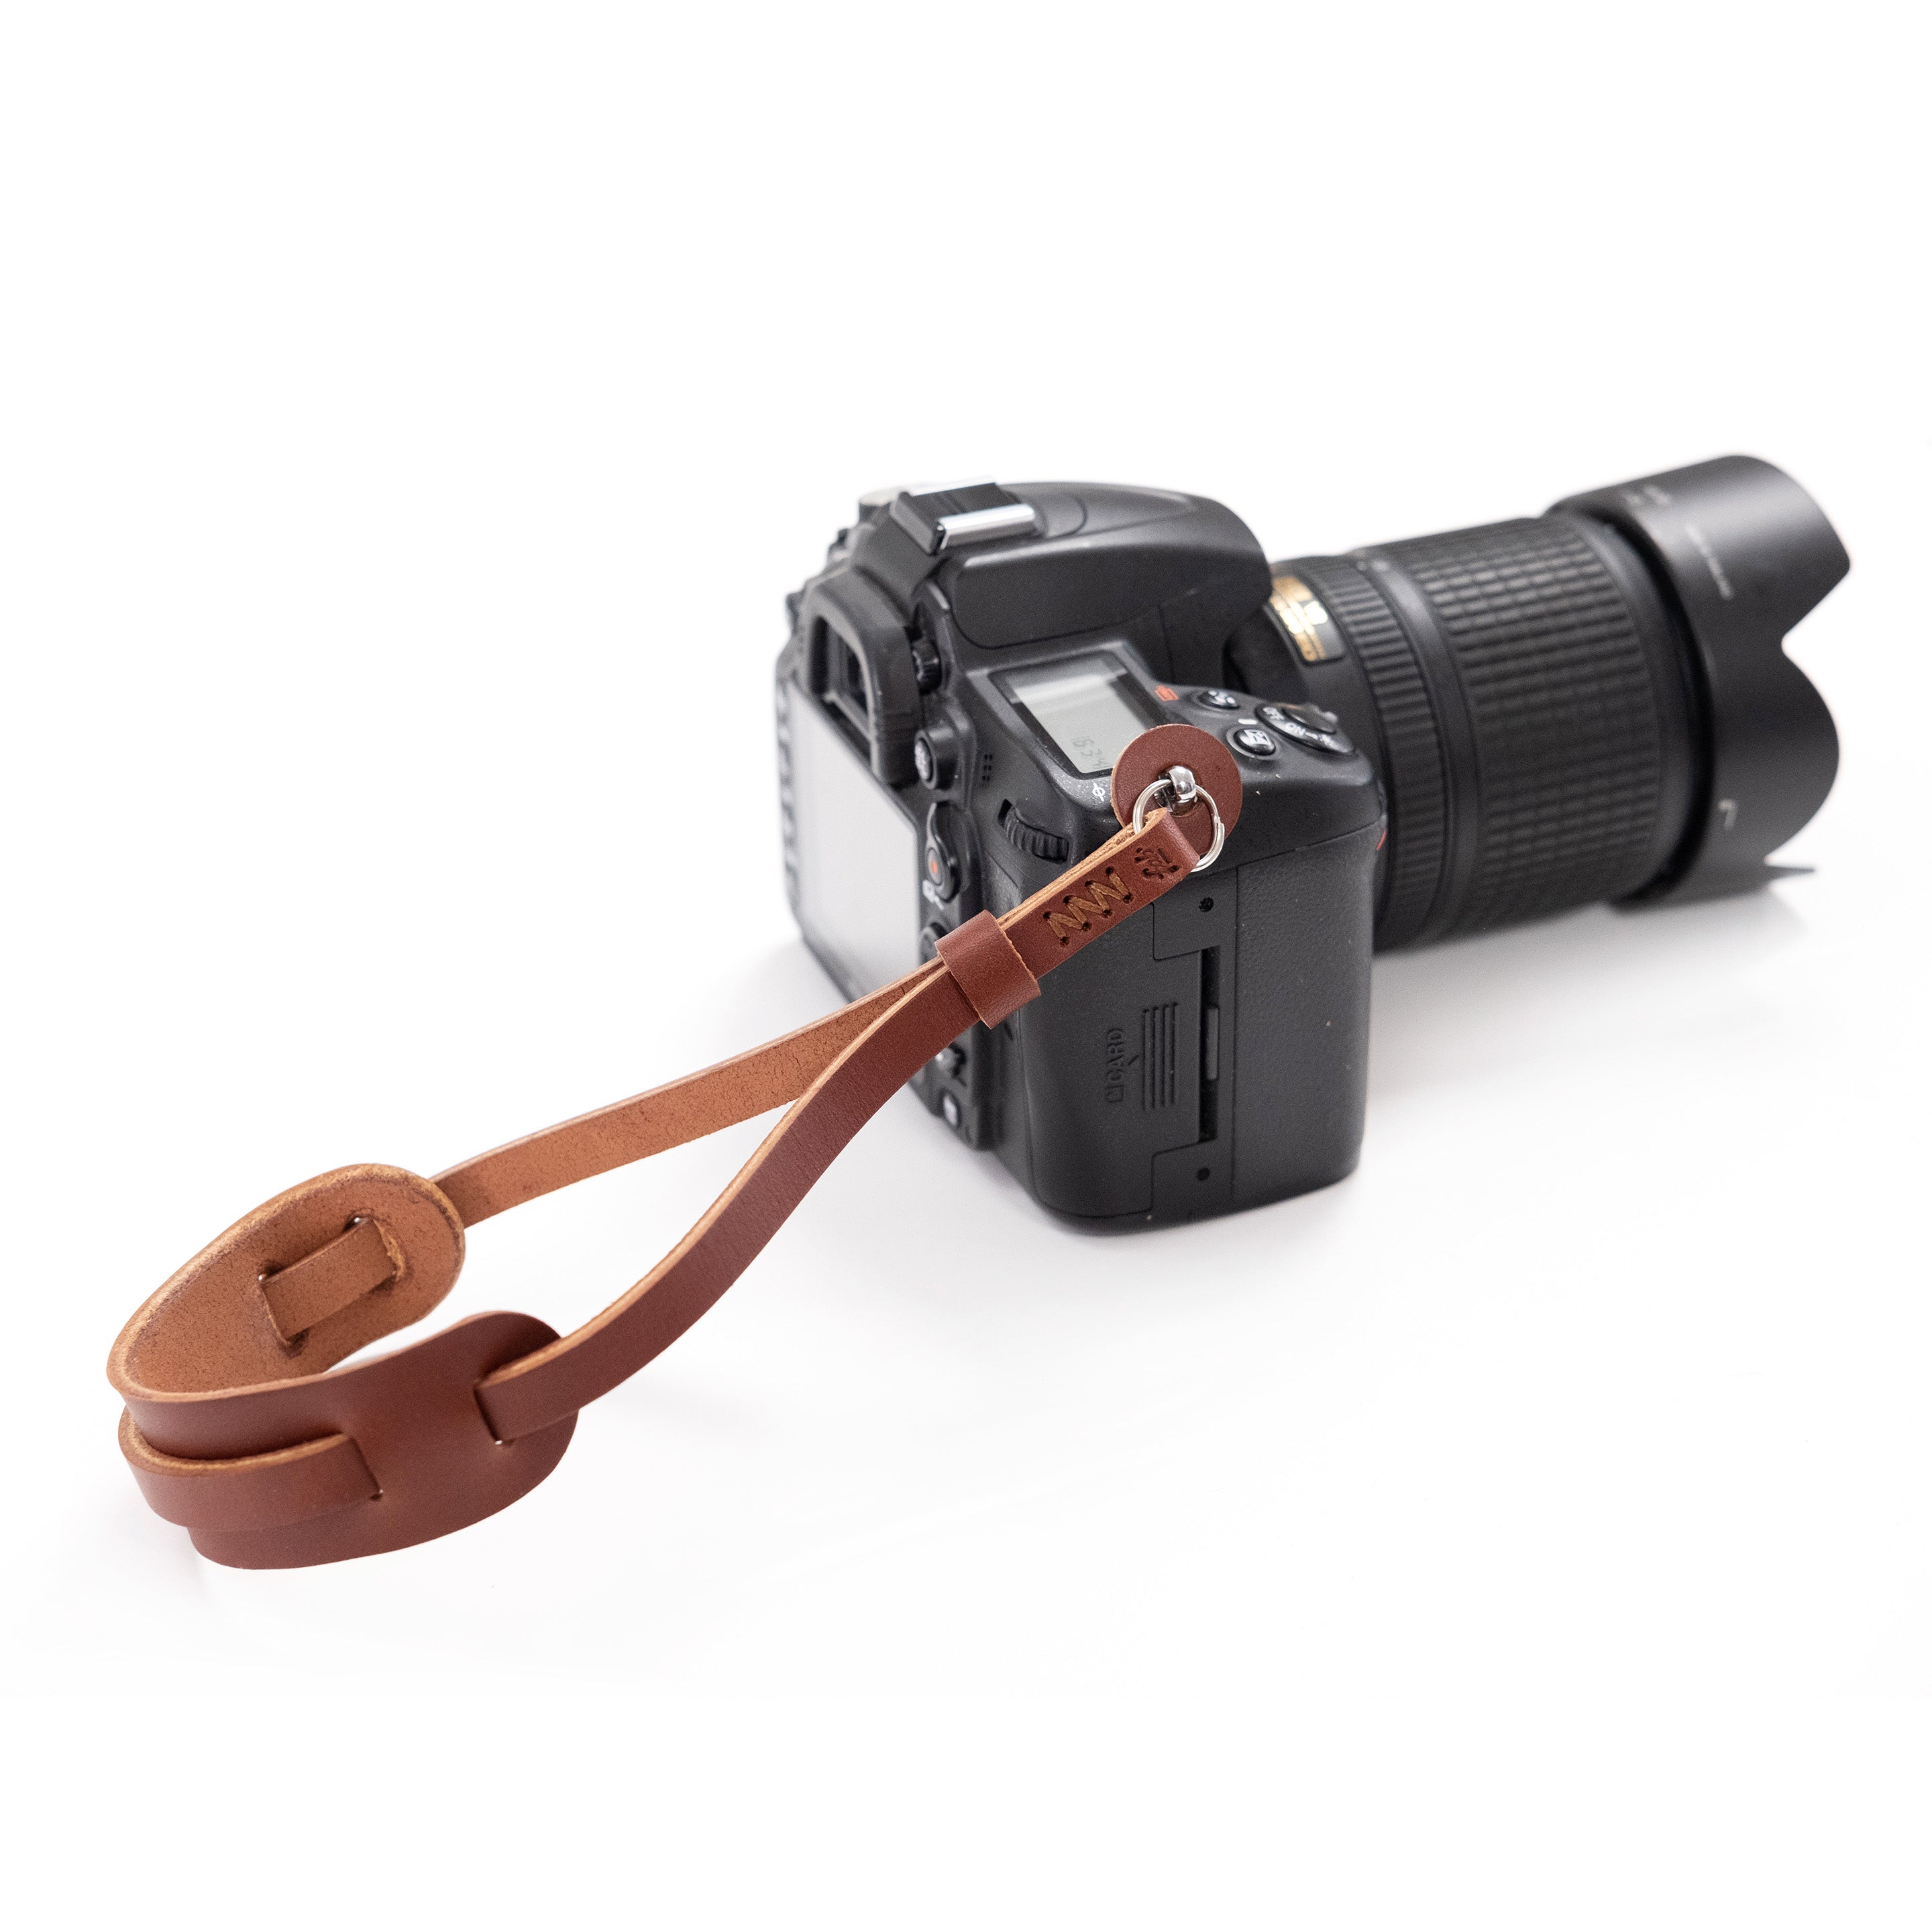 Fab' F28 wrist strap with pad - Brown leather